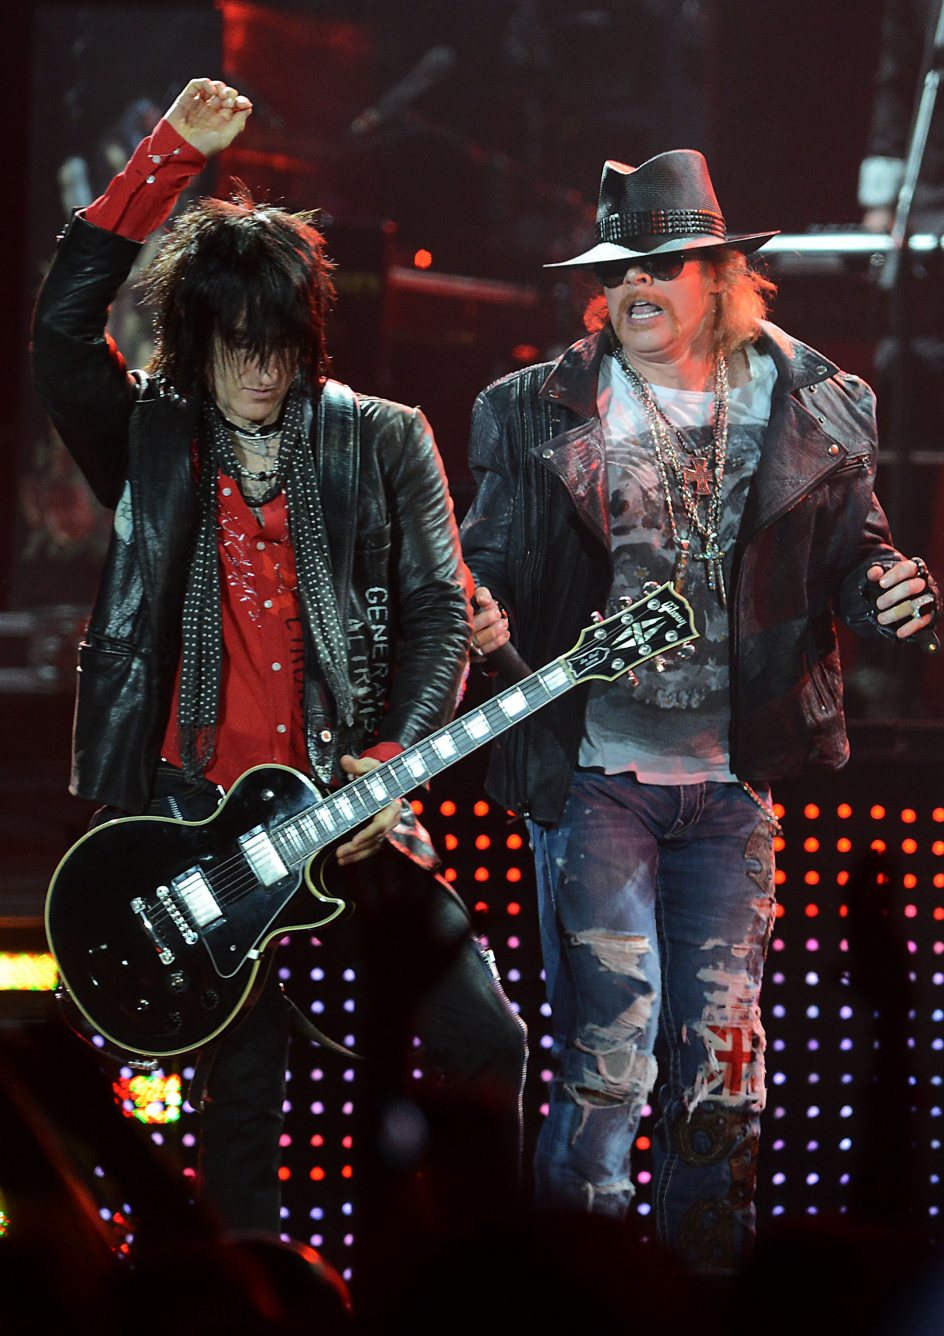 Richard Fortus on Guns N' Roses, The Dead Daisies, and 2016